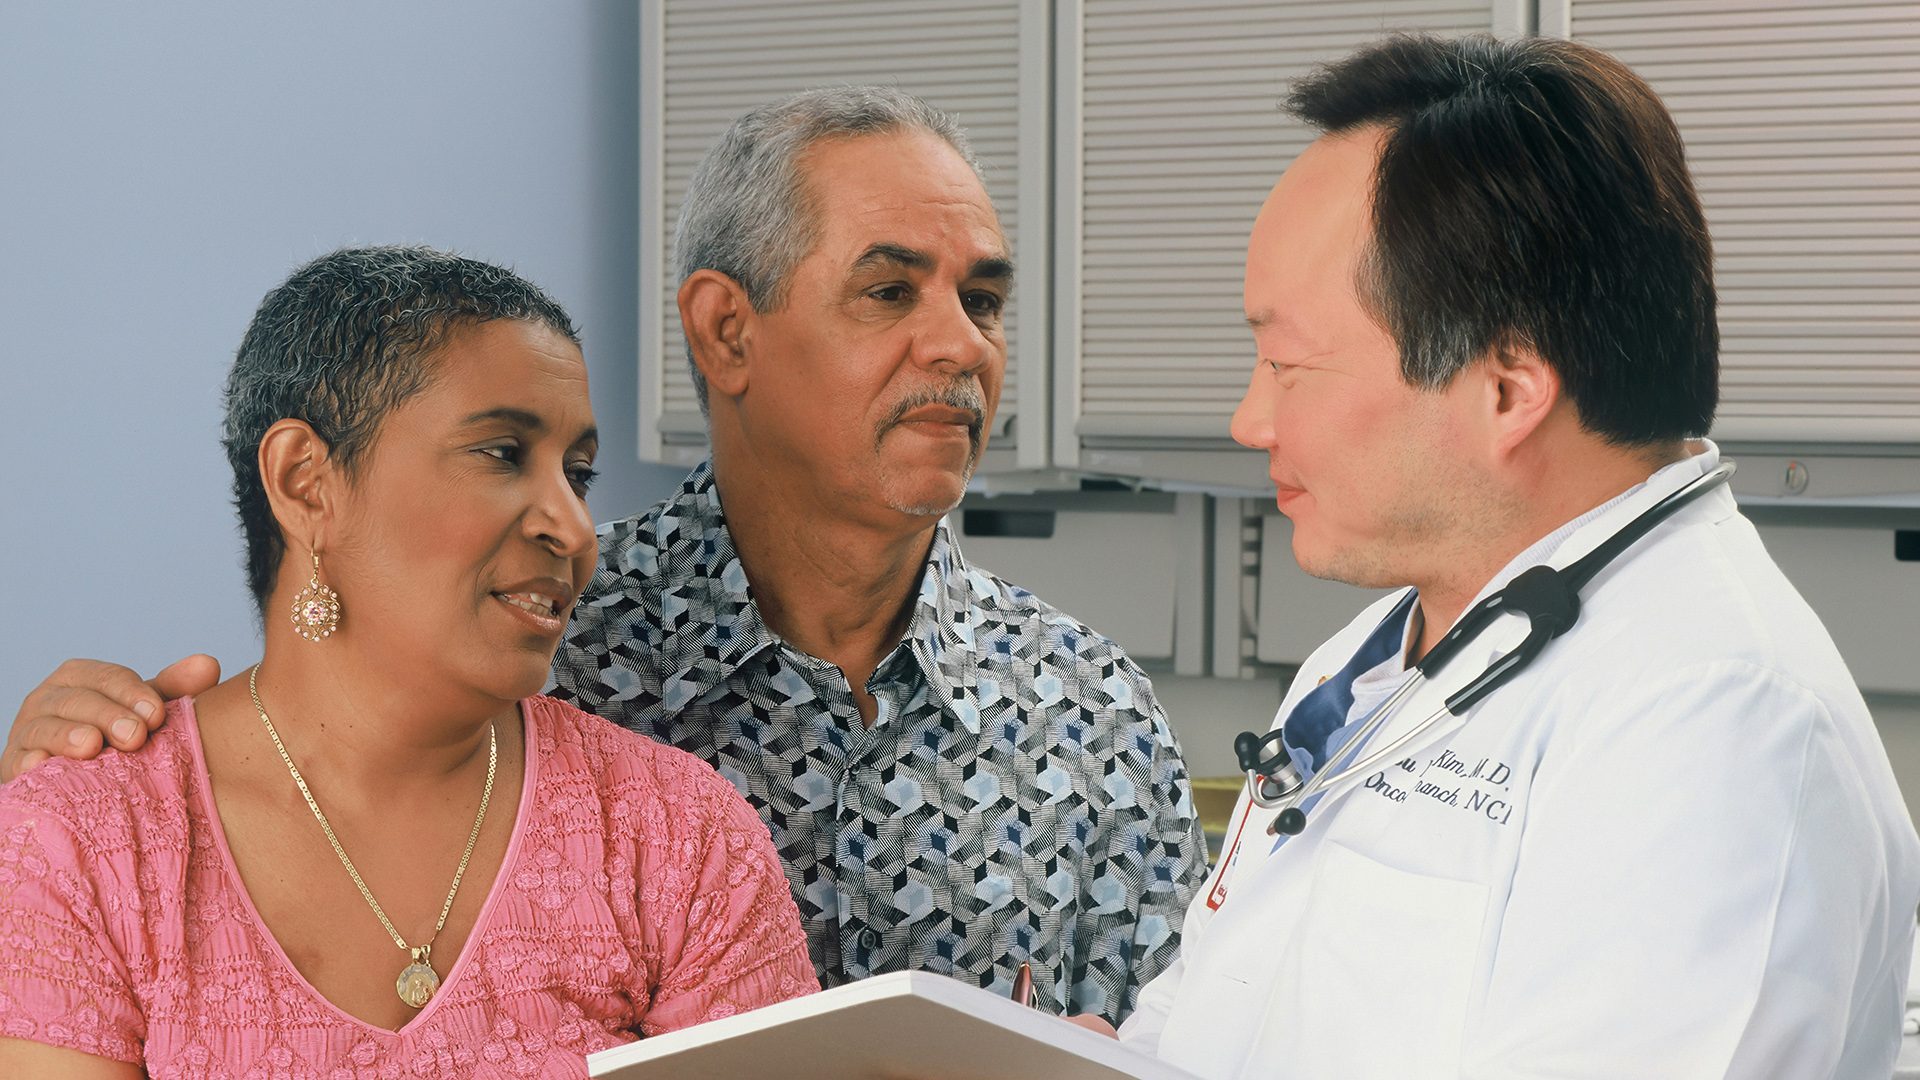 A senior woman and man speaking with a male doctor